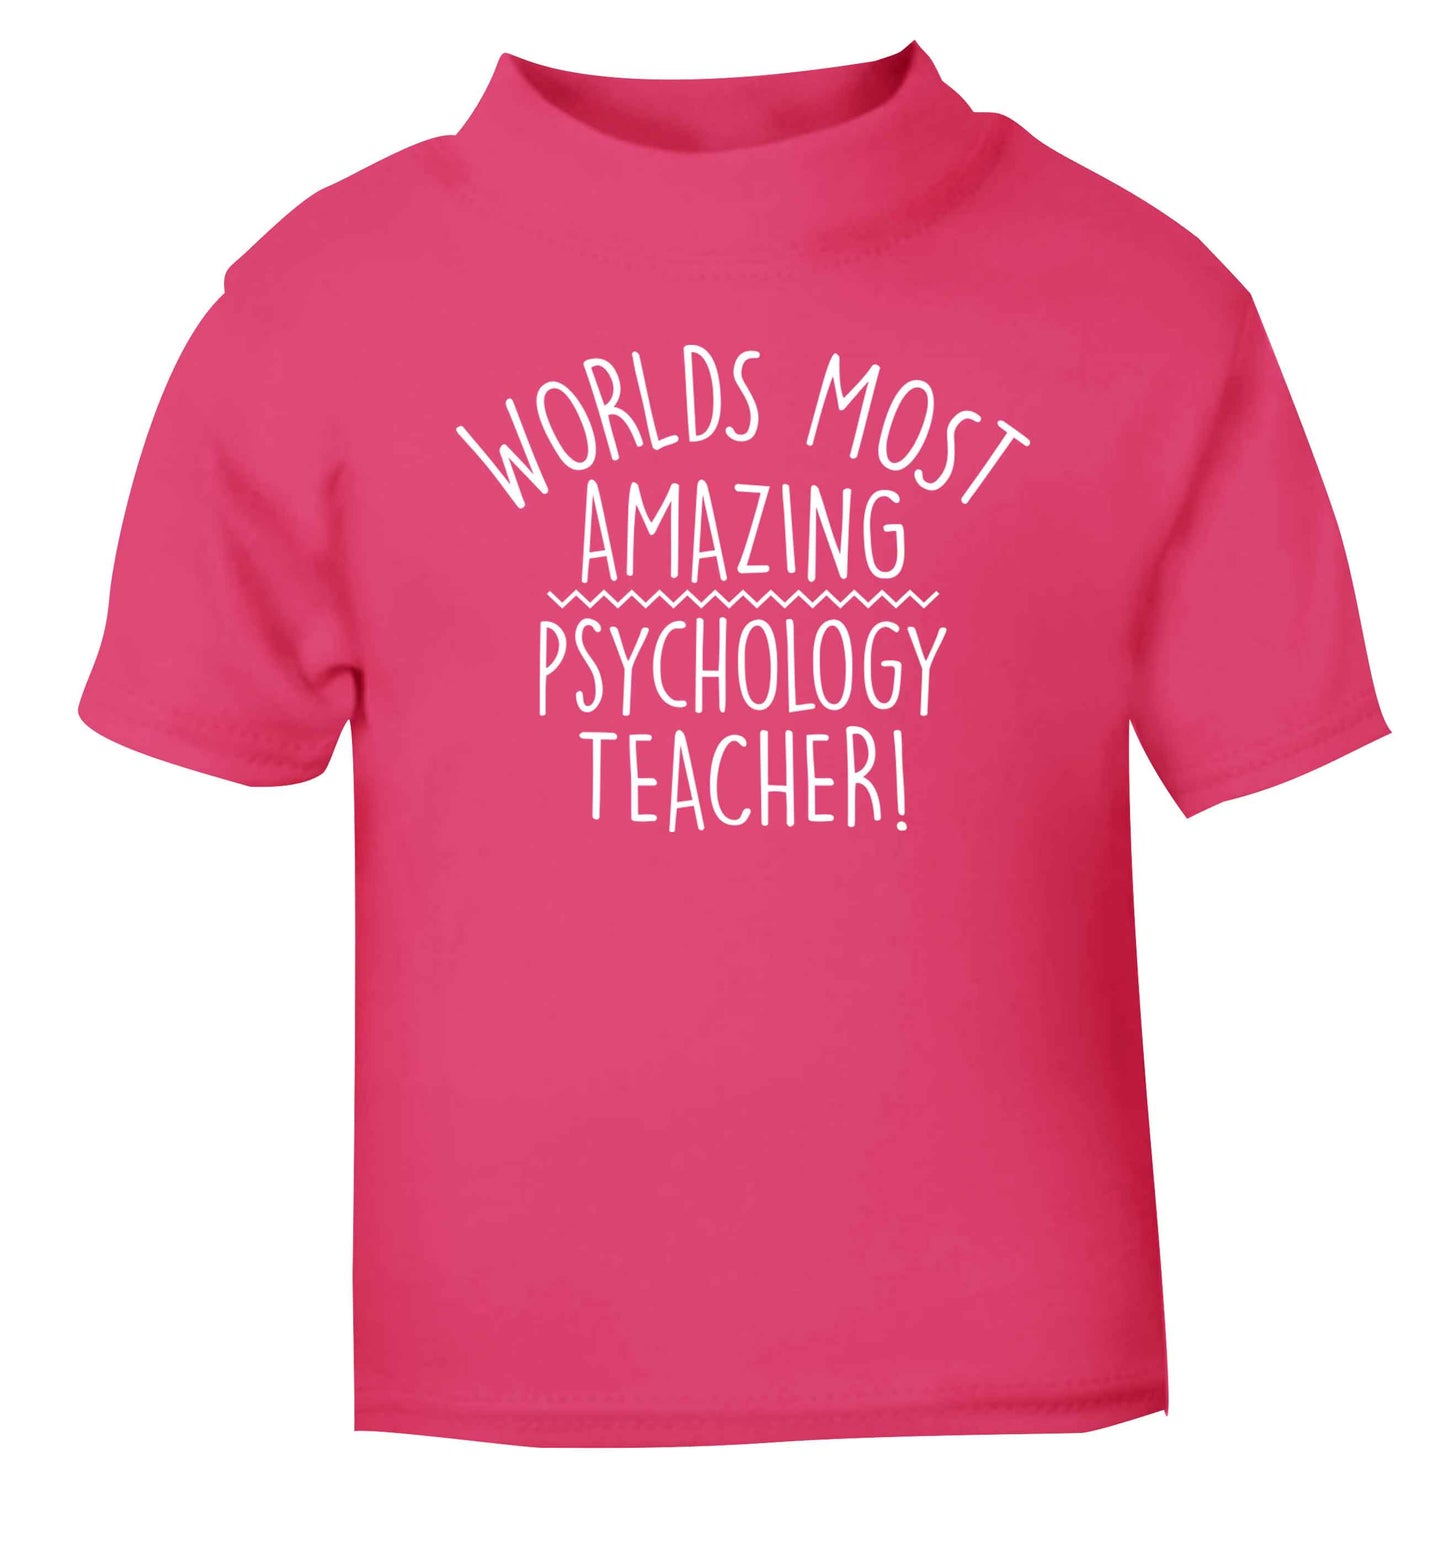 Worlds most amazing psychology teacher pink baby toddler Tshirt 2 Years